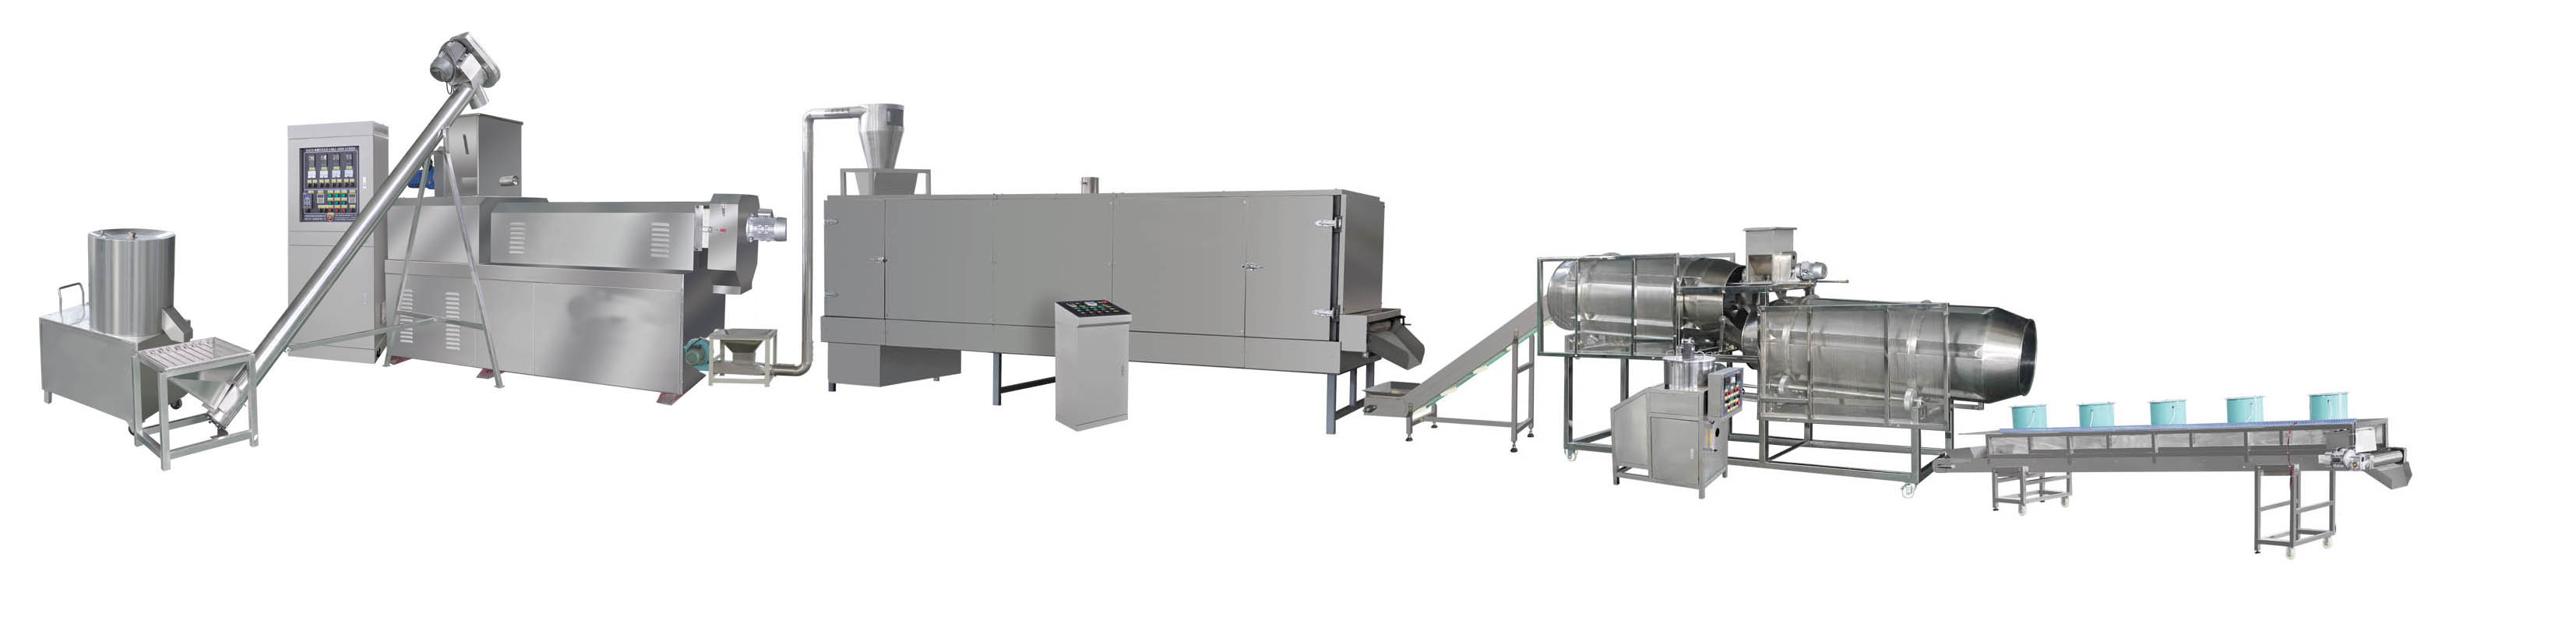 Puff snack food production line.jpg